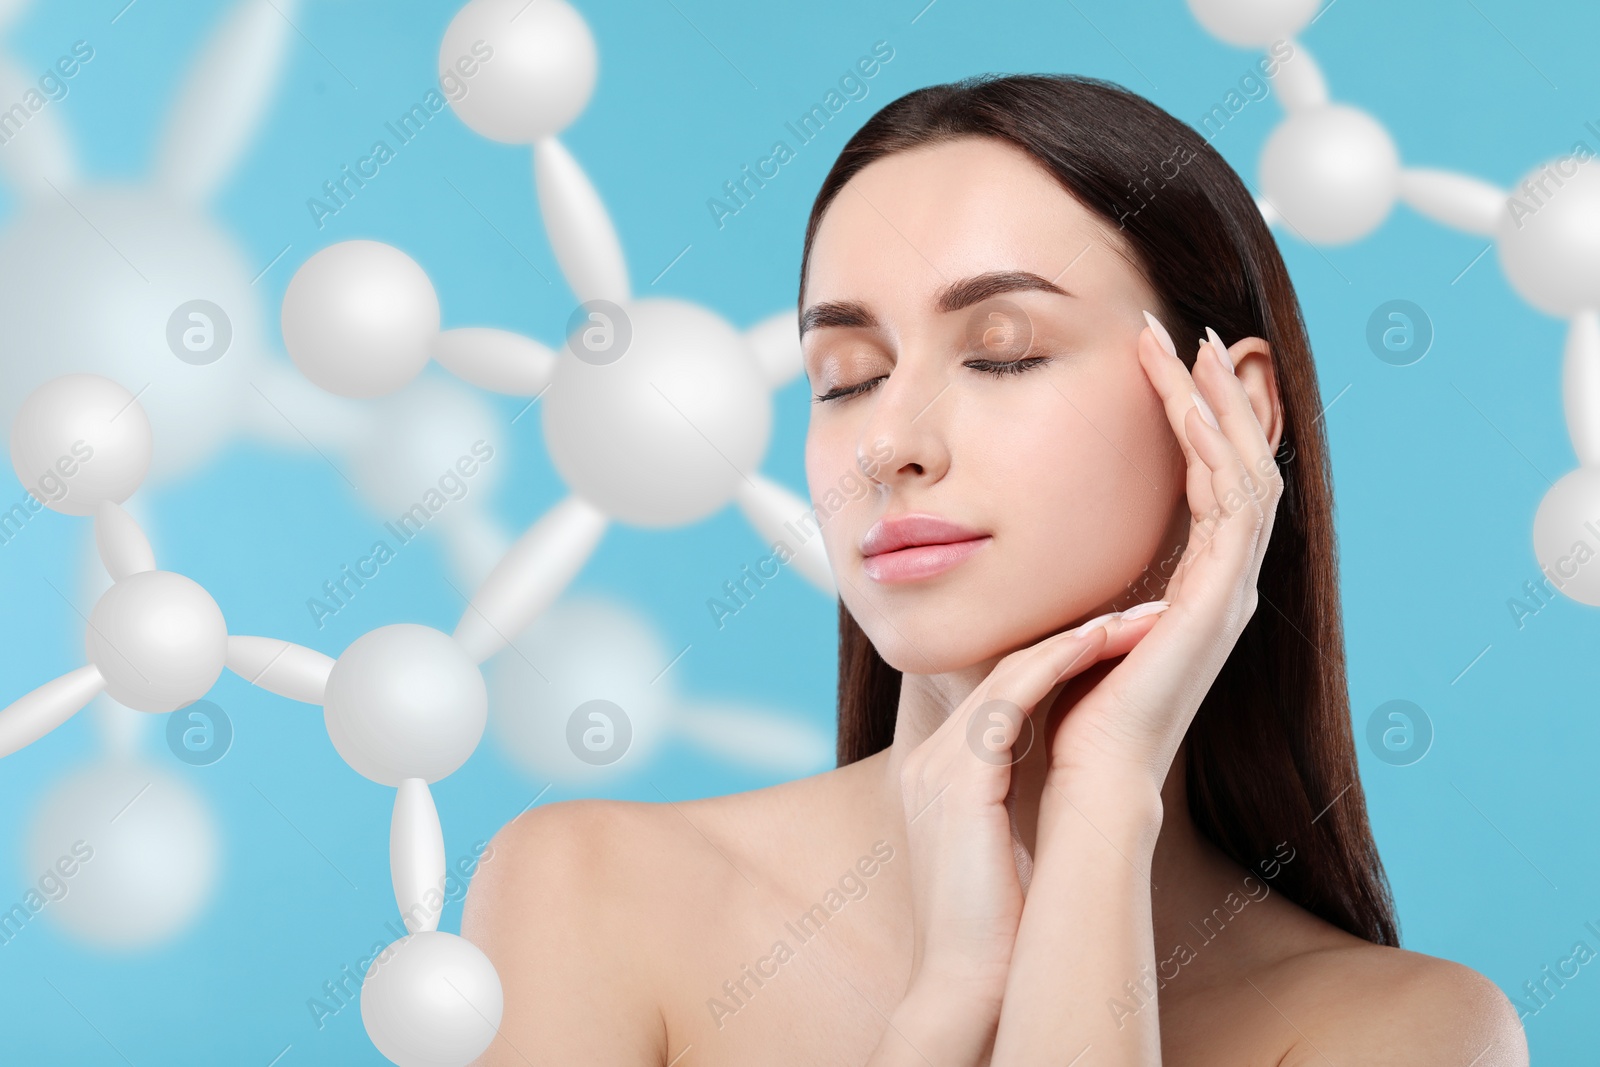 Image of Beautiful woman with perfect healthy skin and molecular model on light blue background. Innovative cosmetology